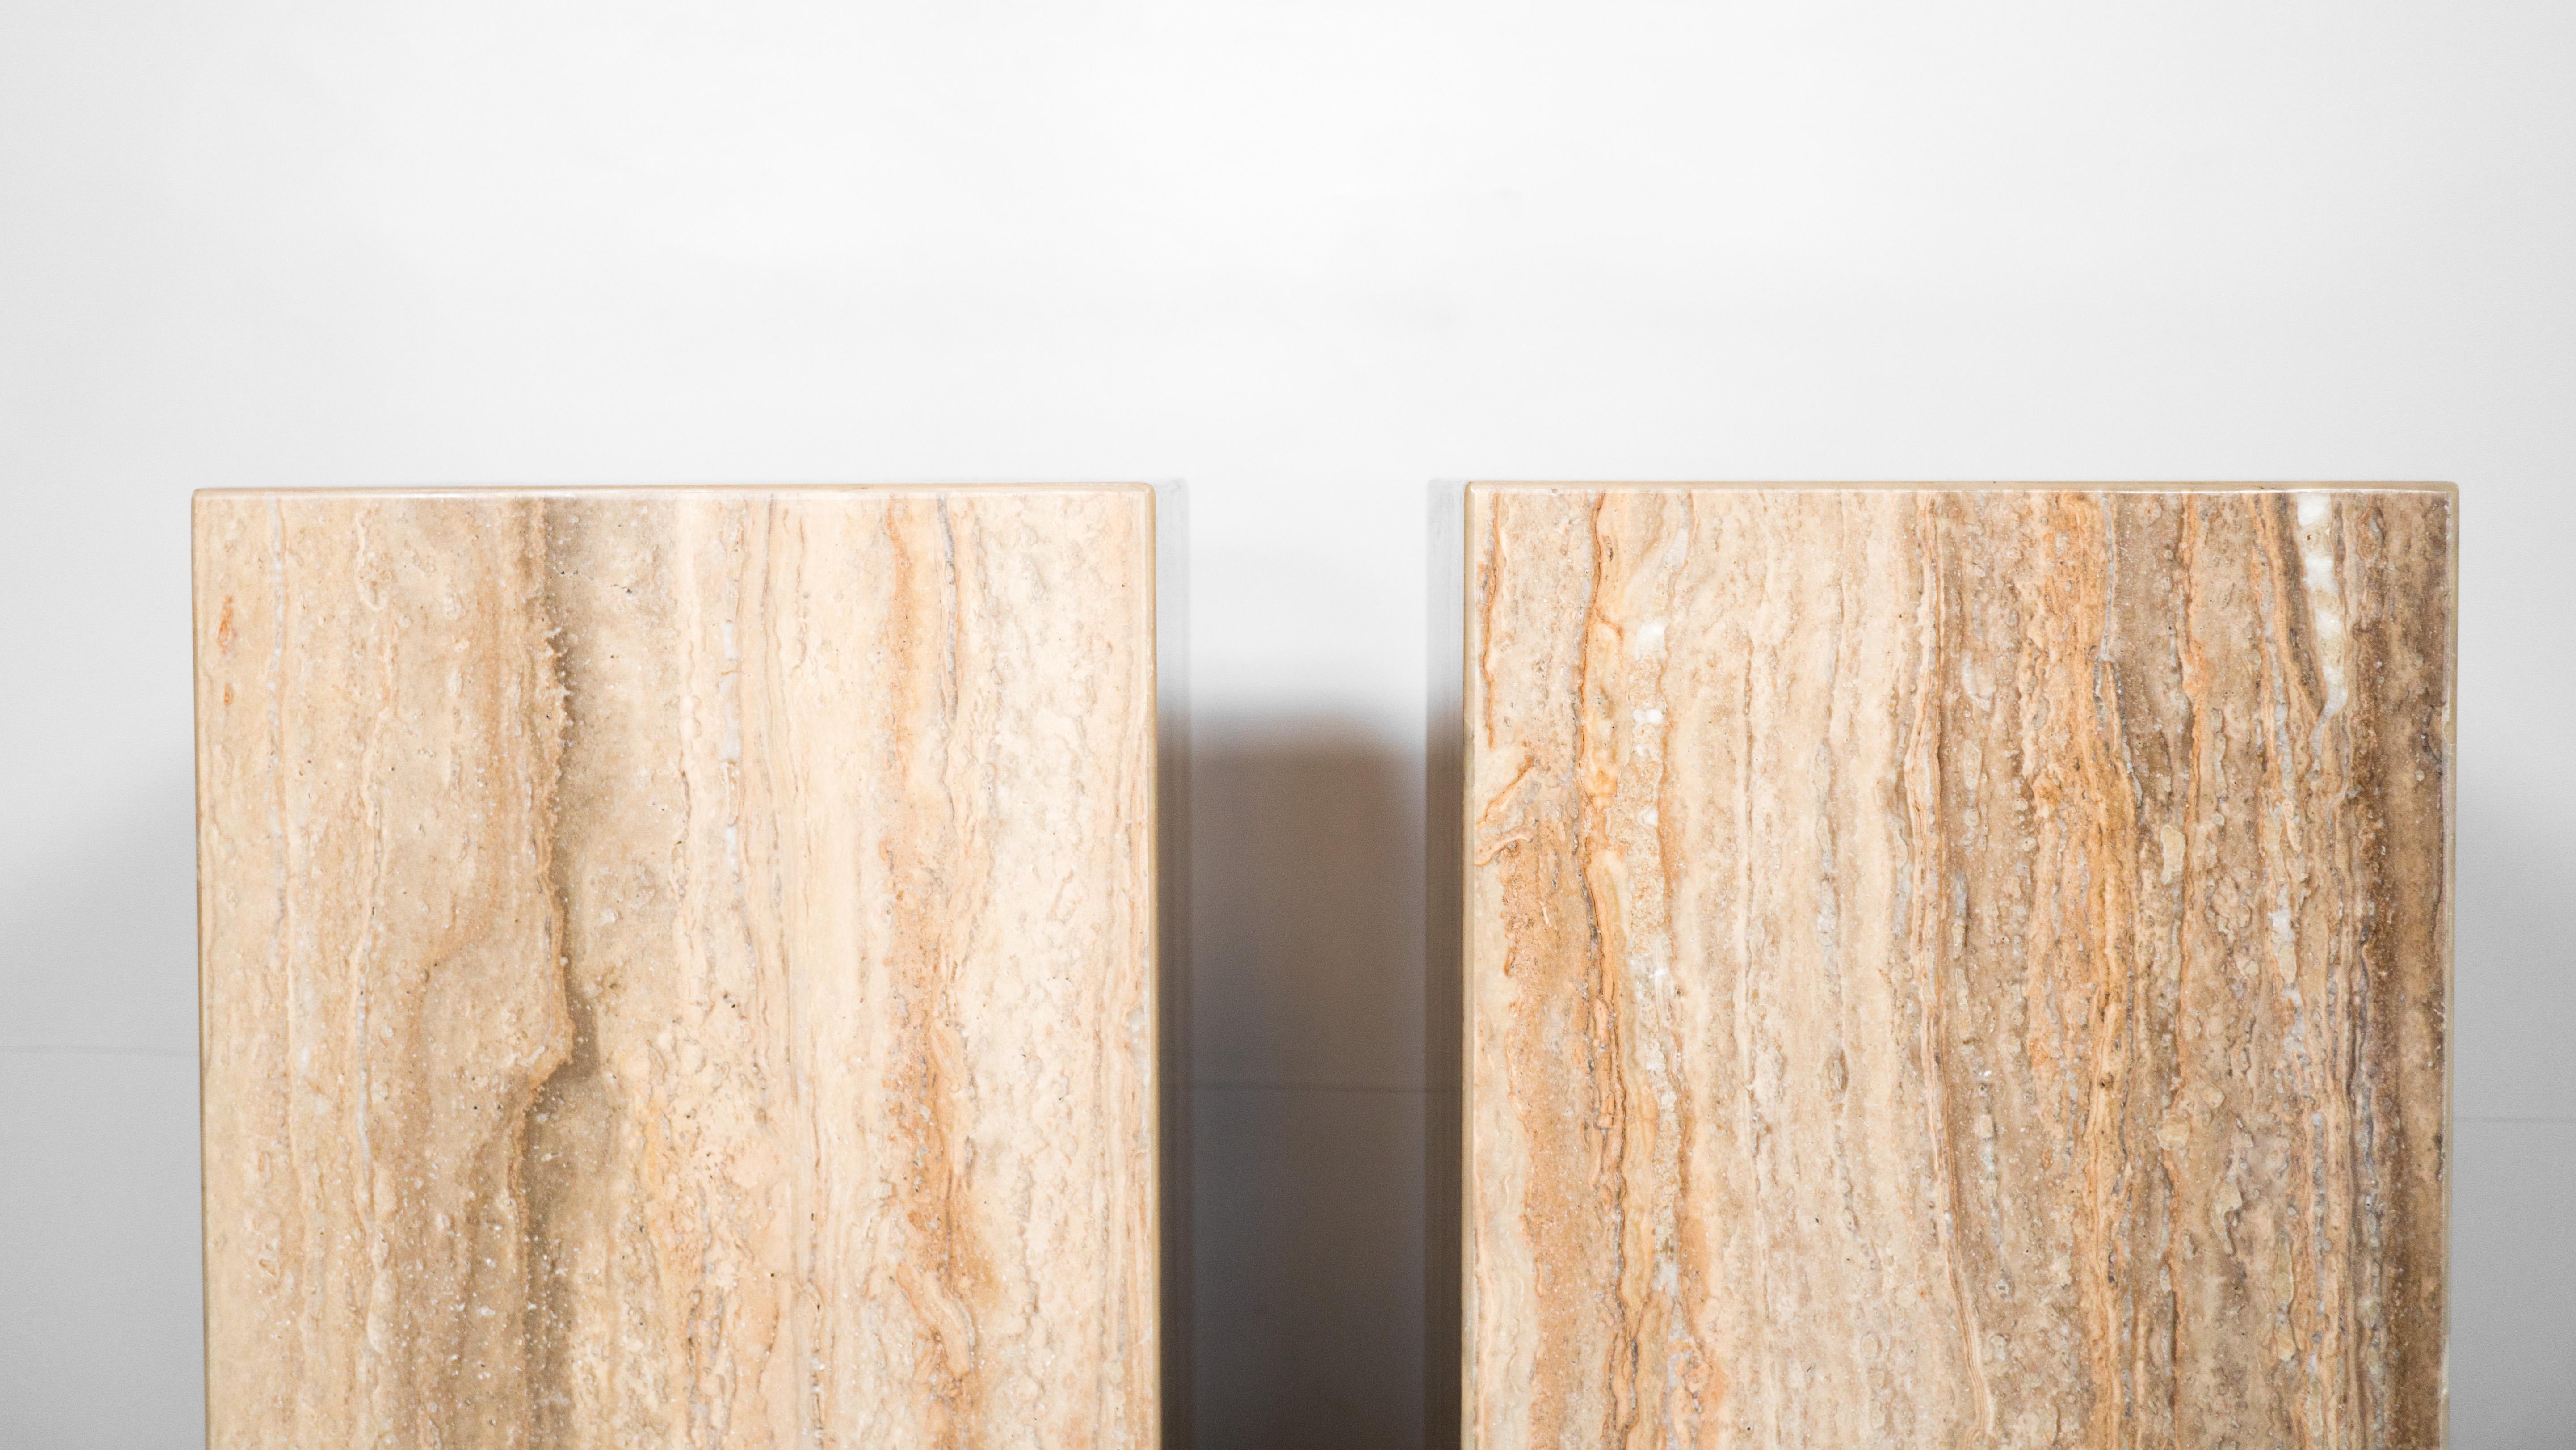 Post-Modern 1980s Italian Polished Travertine Tower Cube Side Tables - a Pair For Sale